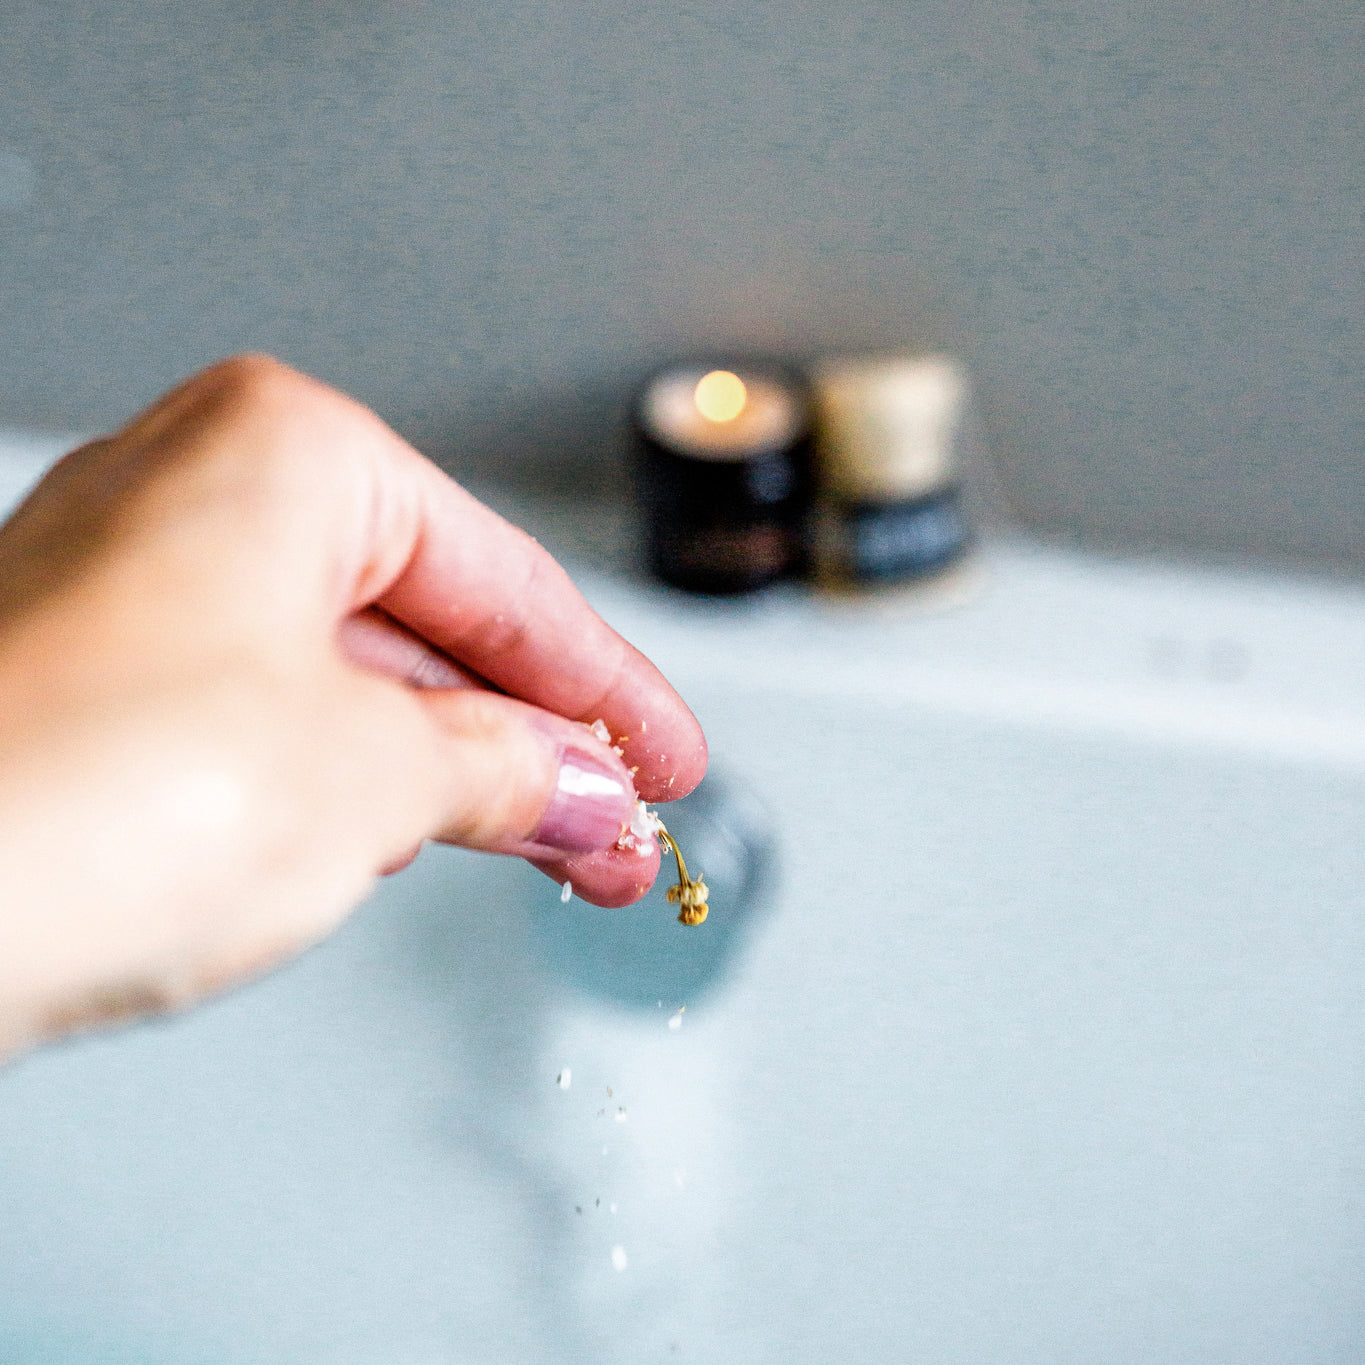 A hand with a light pink manicure sprinkles bath salts into a bathtub. The focus is on the fingers releasing small salt crystals, capturing the motion with a slight blur. In the soft-focused background, a candle burns, providing a serene and warm ambiance. The scene suggests a relaxing, spa-like atmosphere within a home bathroom.